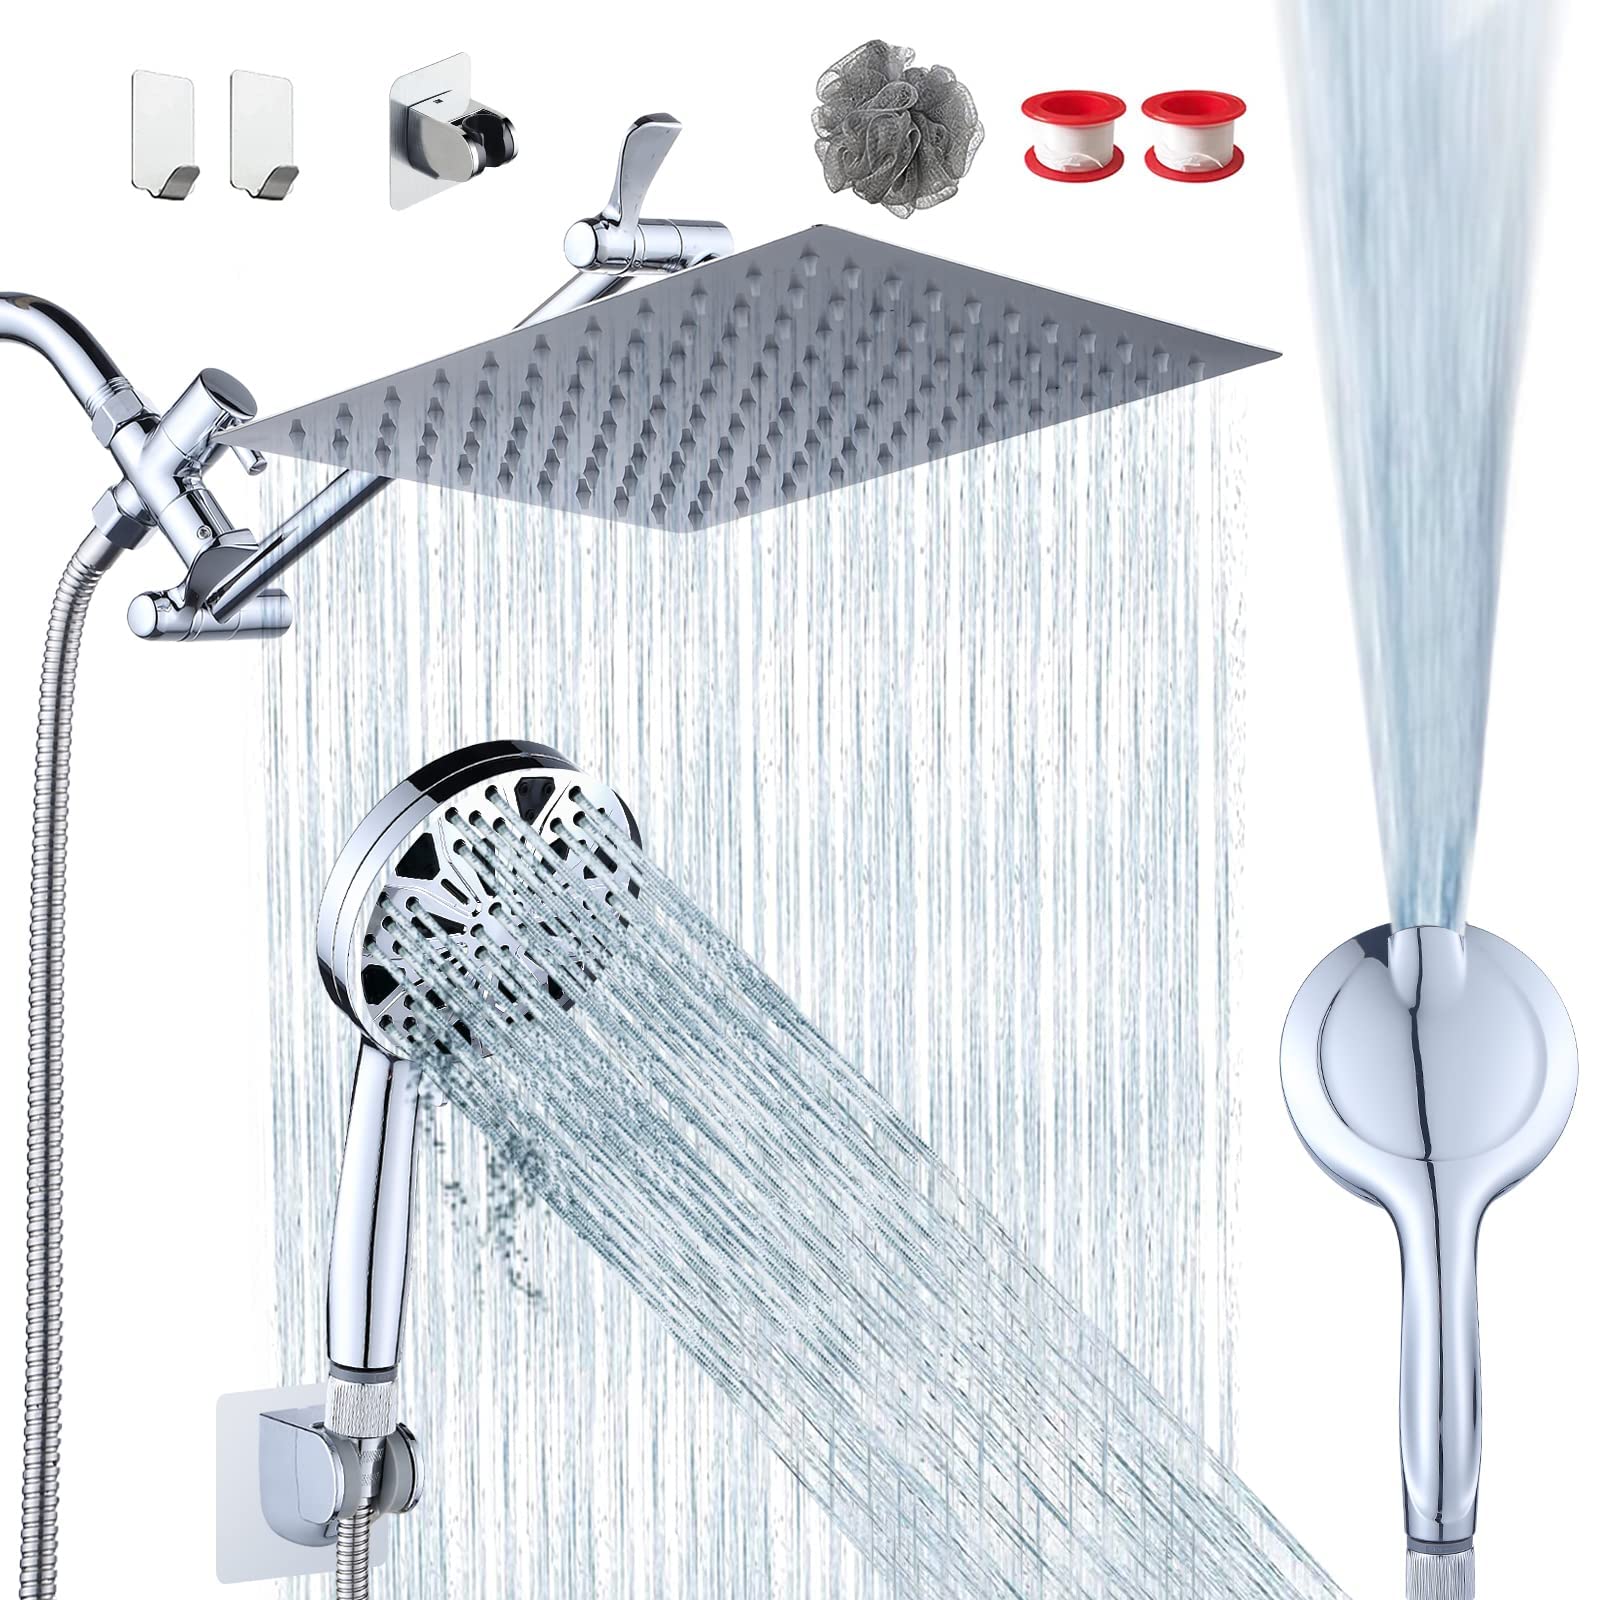 Razime 10''Rainfall Shower Head with Handheld Combo High Pressure 8+2 MODE built-in power wash, Stainless Steel Chrome Showerhead with 11'' Extension Arm Height/Angle Adjustable with Holder&60